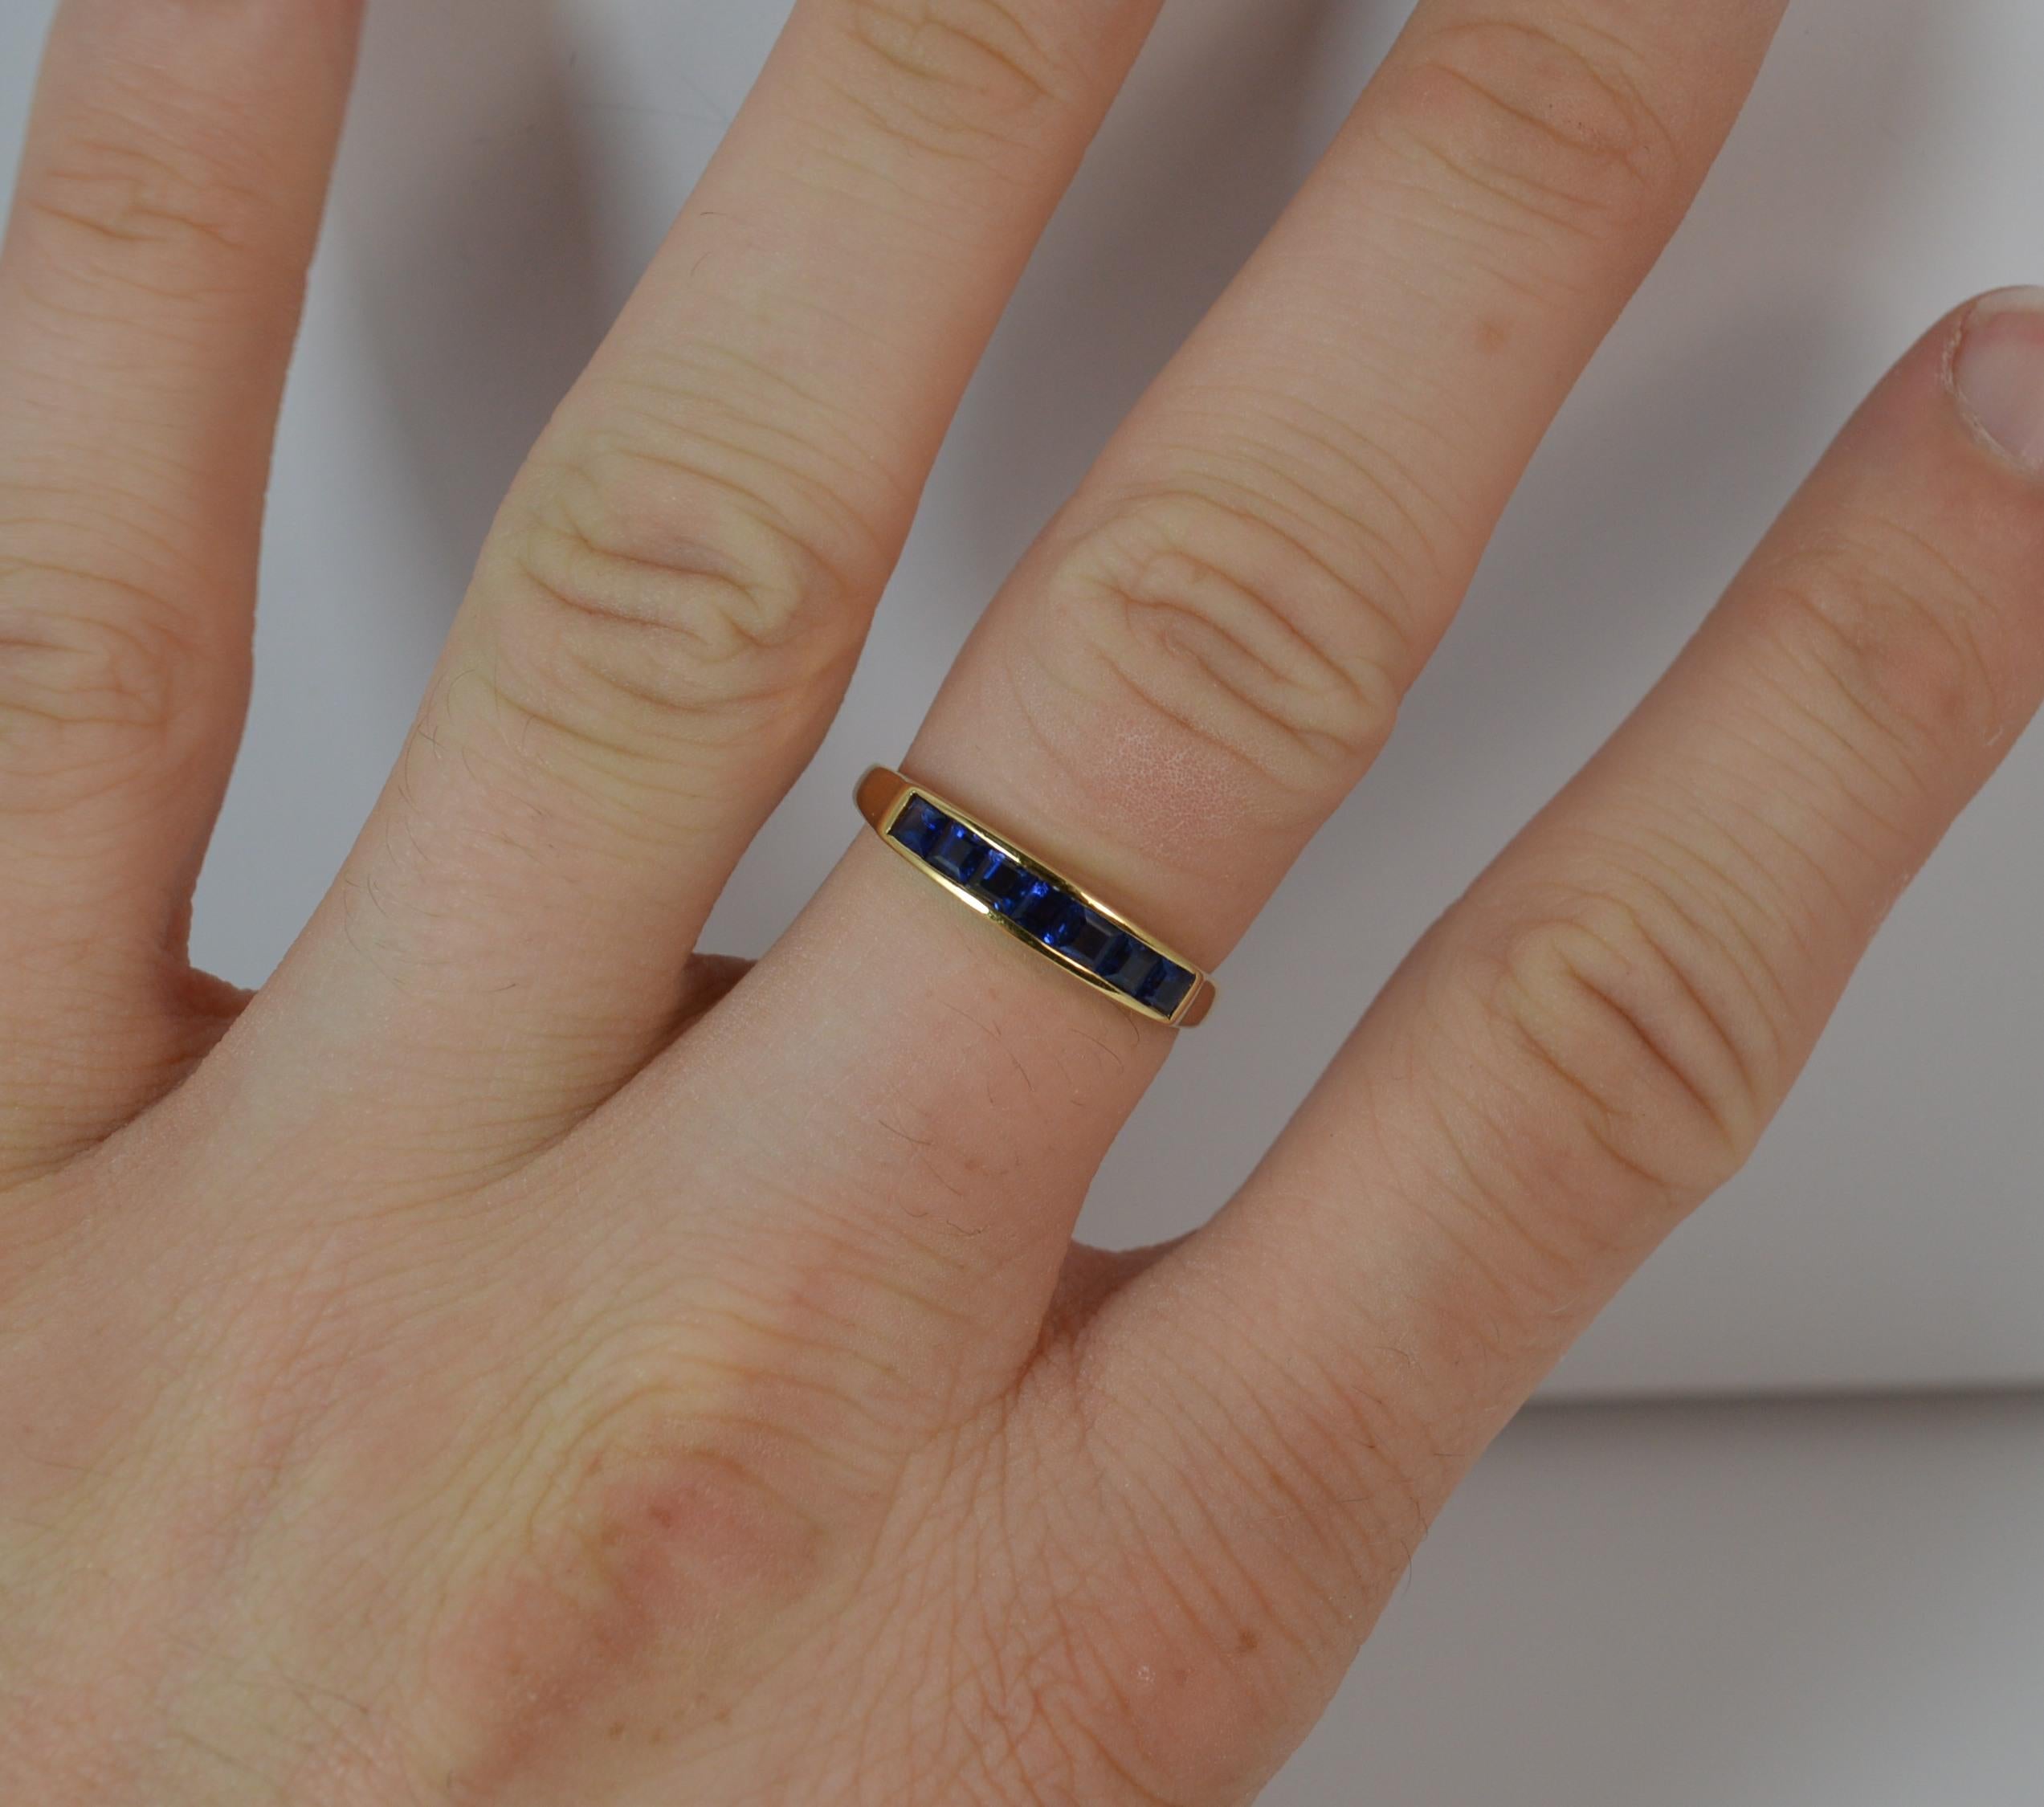 A superb contemporary half eternity stack ring.
Size ; P 1/2 UK, 7 3/4 US
Solid 18 carat yellow gold example.
Designed with seven princess cut sapphires in tension channel setting.
15mm spread of stones. 3.7mm wide band to front.

Condition ; Very